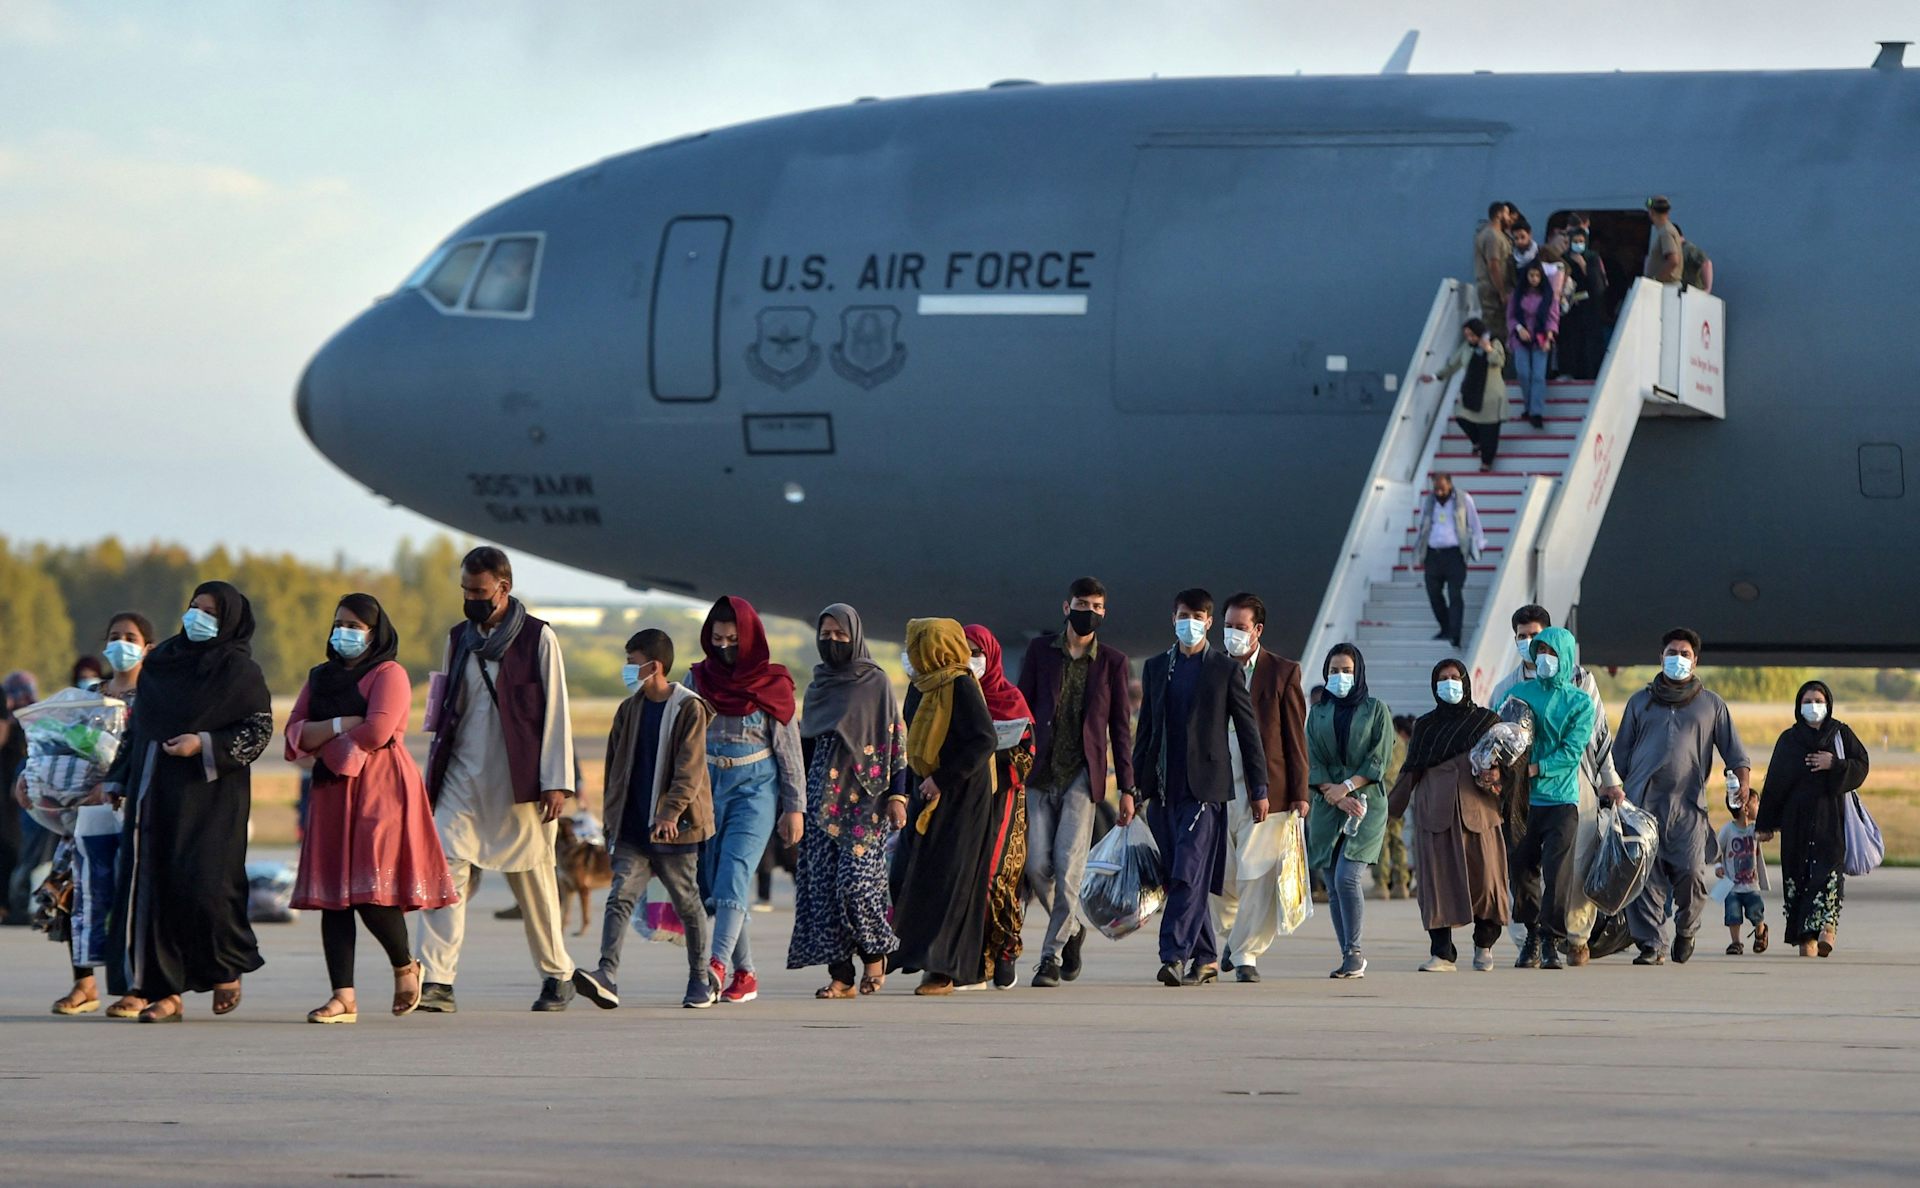 Afghan nationals disembark from a US air force aircraft after an evacuation flight from Kabul